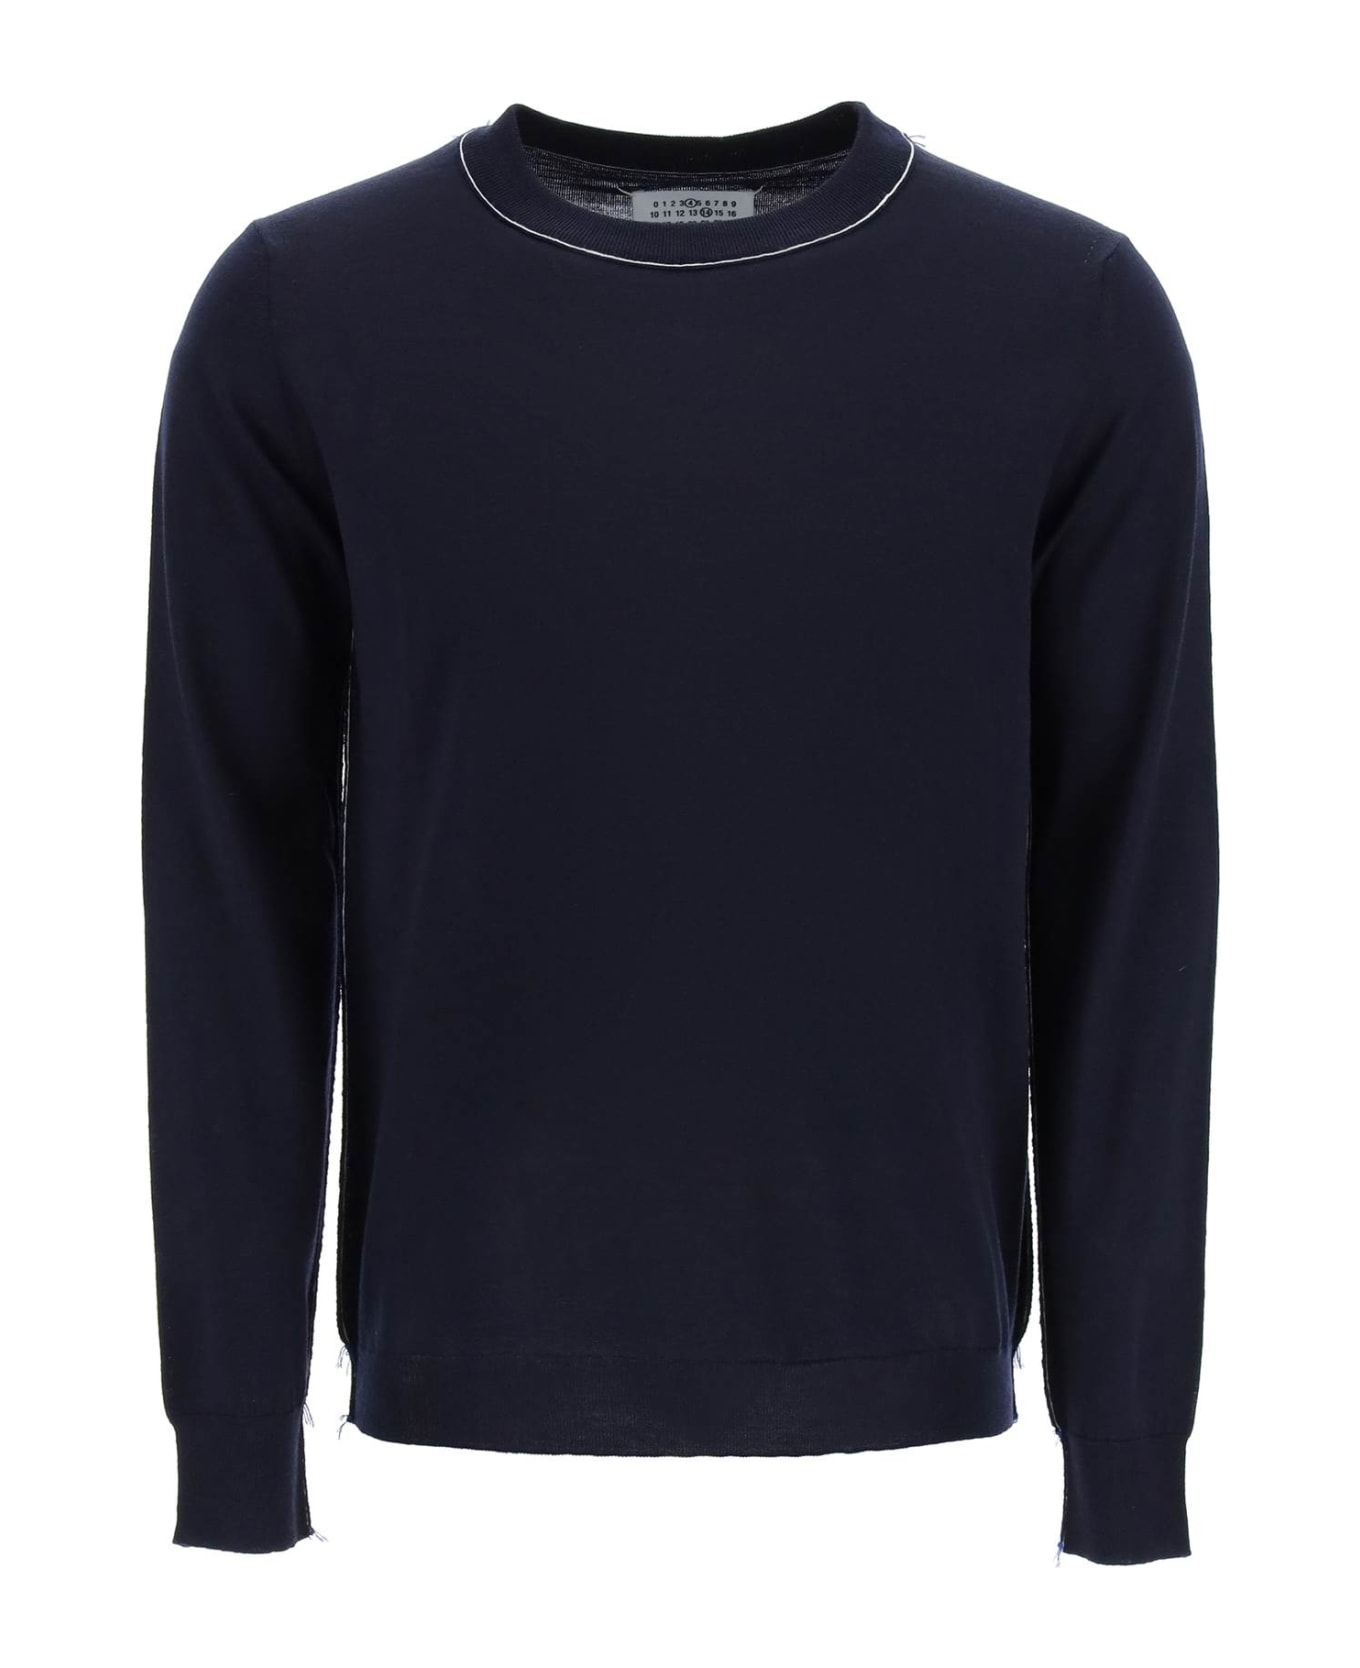 Maison Margiela Wool Sweater With Inside-out Seams | italist, ALWAYS ...